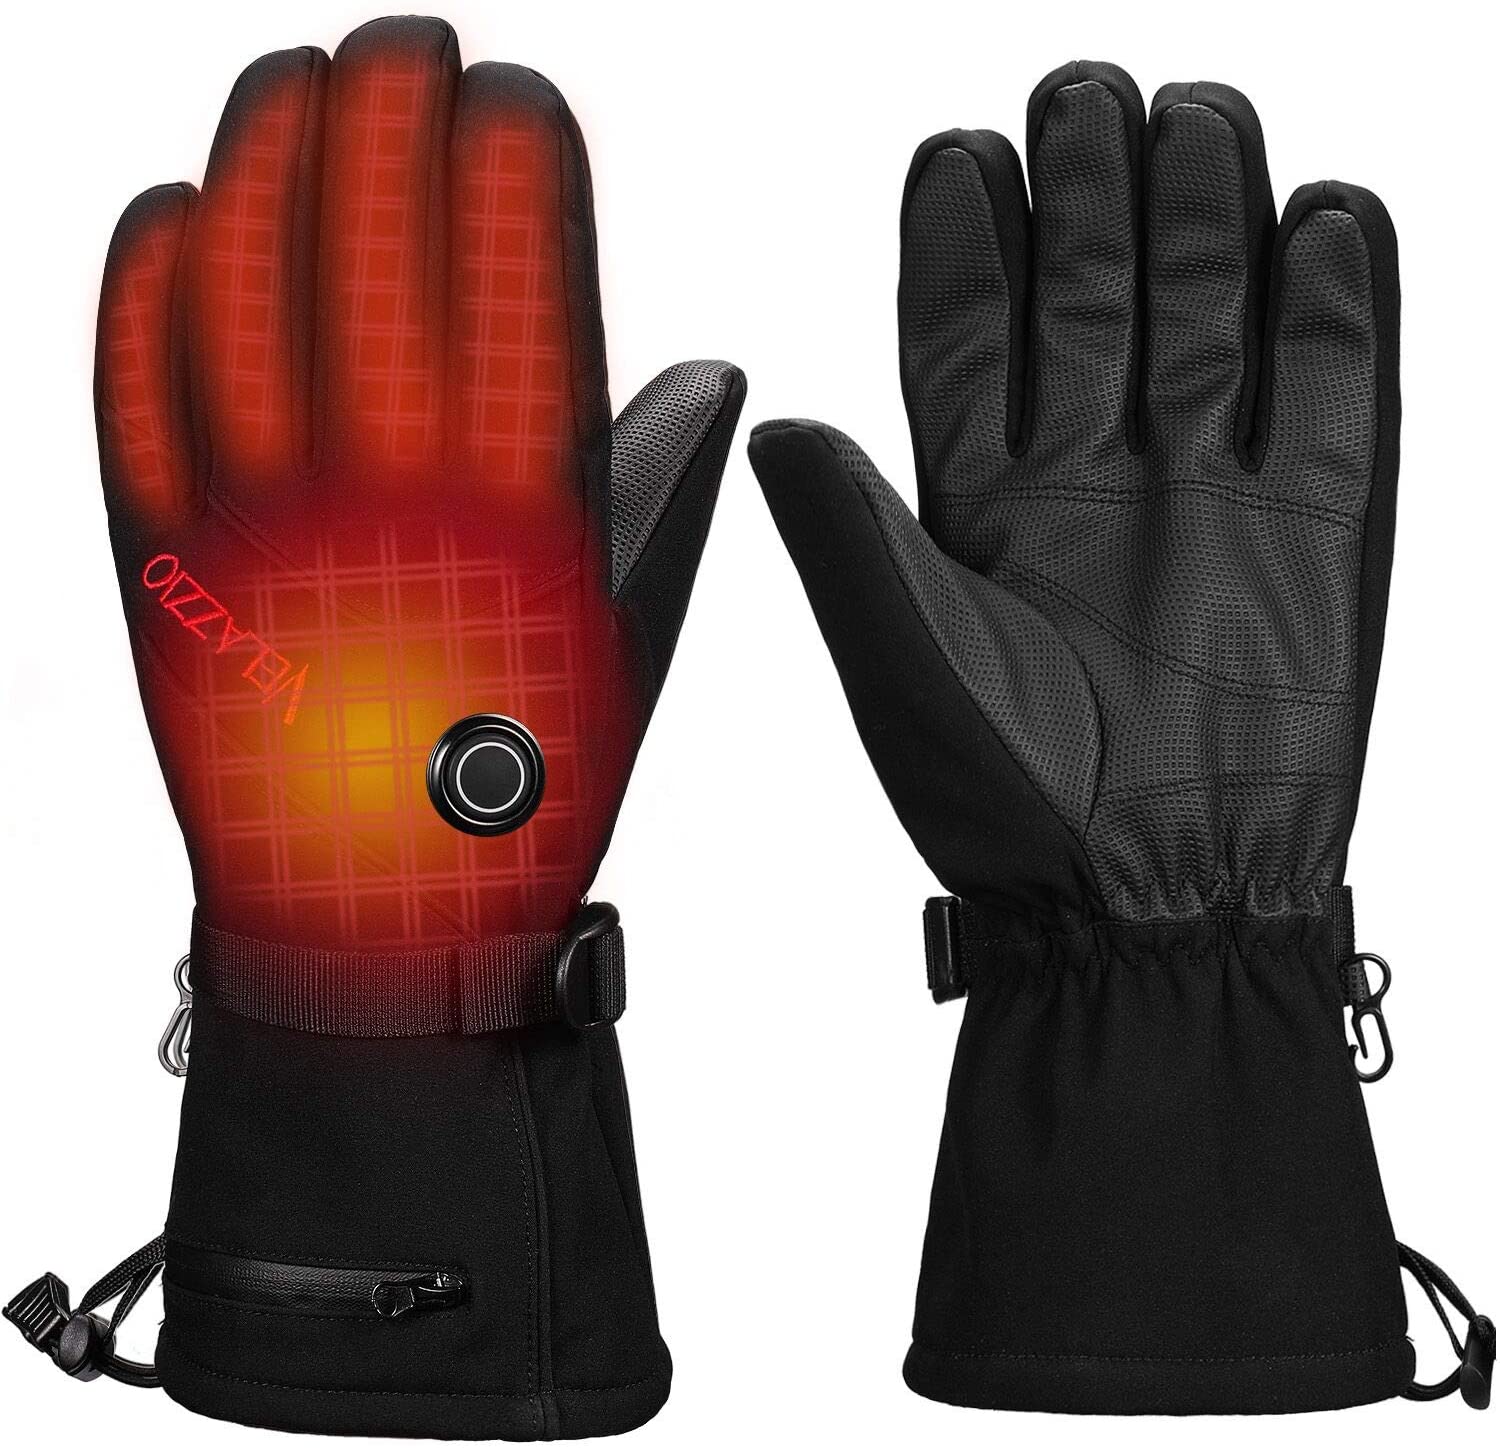 best ice fishing gloves 2022, ice fishing glove reviews, where to buy ice fishing gloves, ice fishing gloves for sale, velazzio heated gloves review, velazzio heated ski gloves review